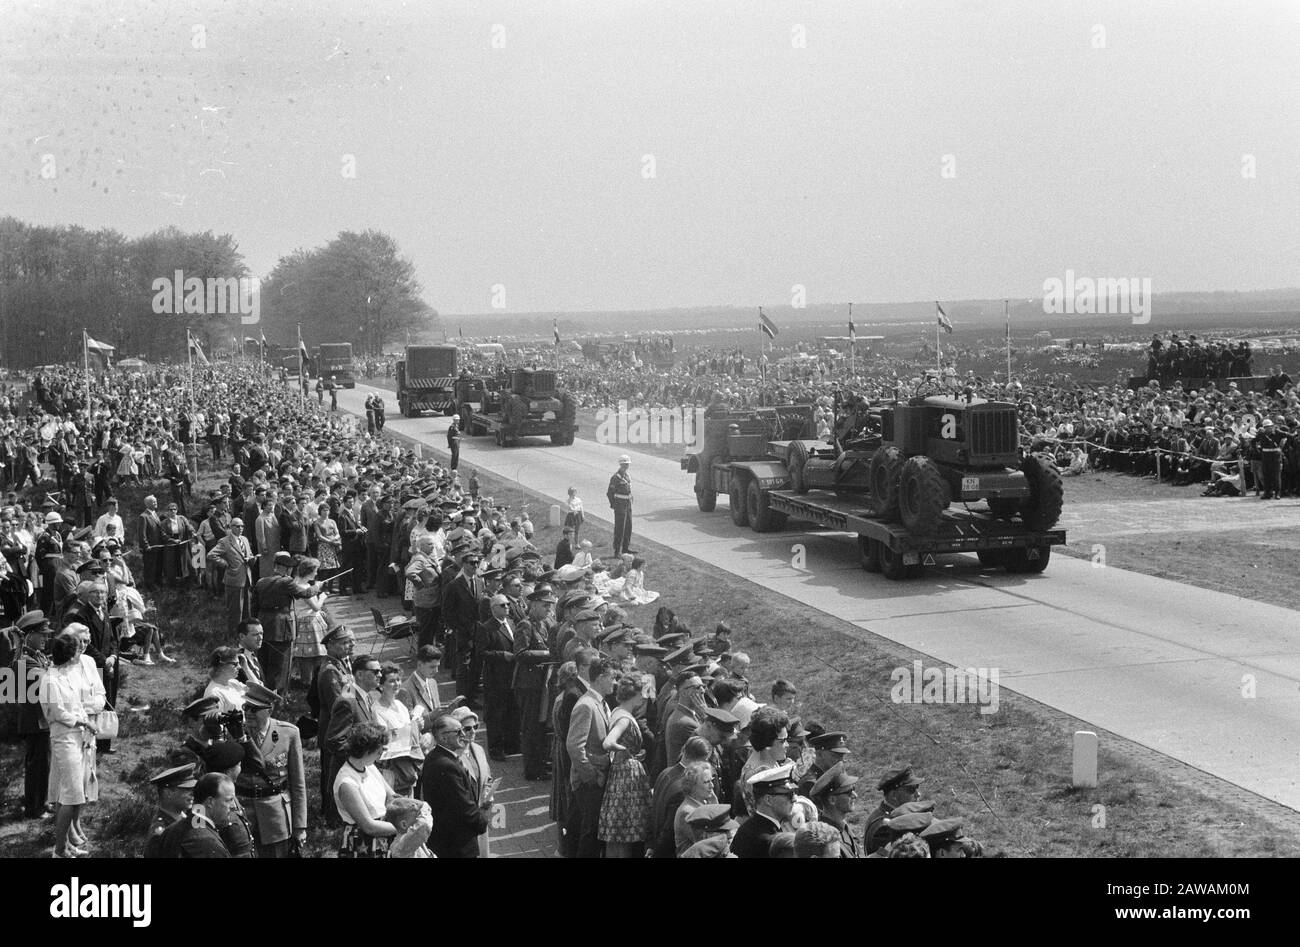 Military parade in Ede for Queen Juliana and Prince Bernhard Date: May 5, 1960 Location: Ede, Gelderland Keywords: military parades Stock Photo